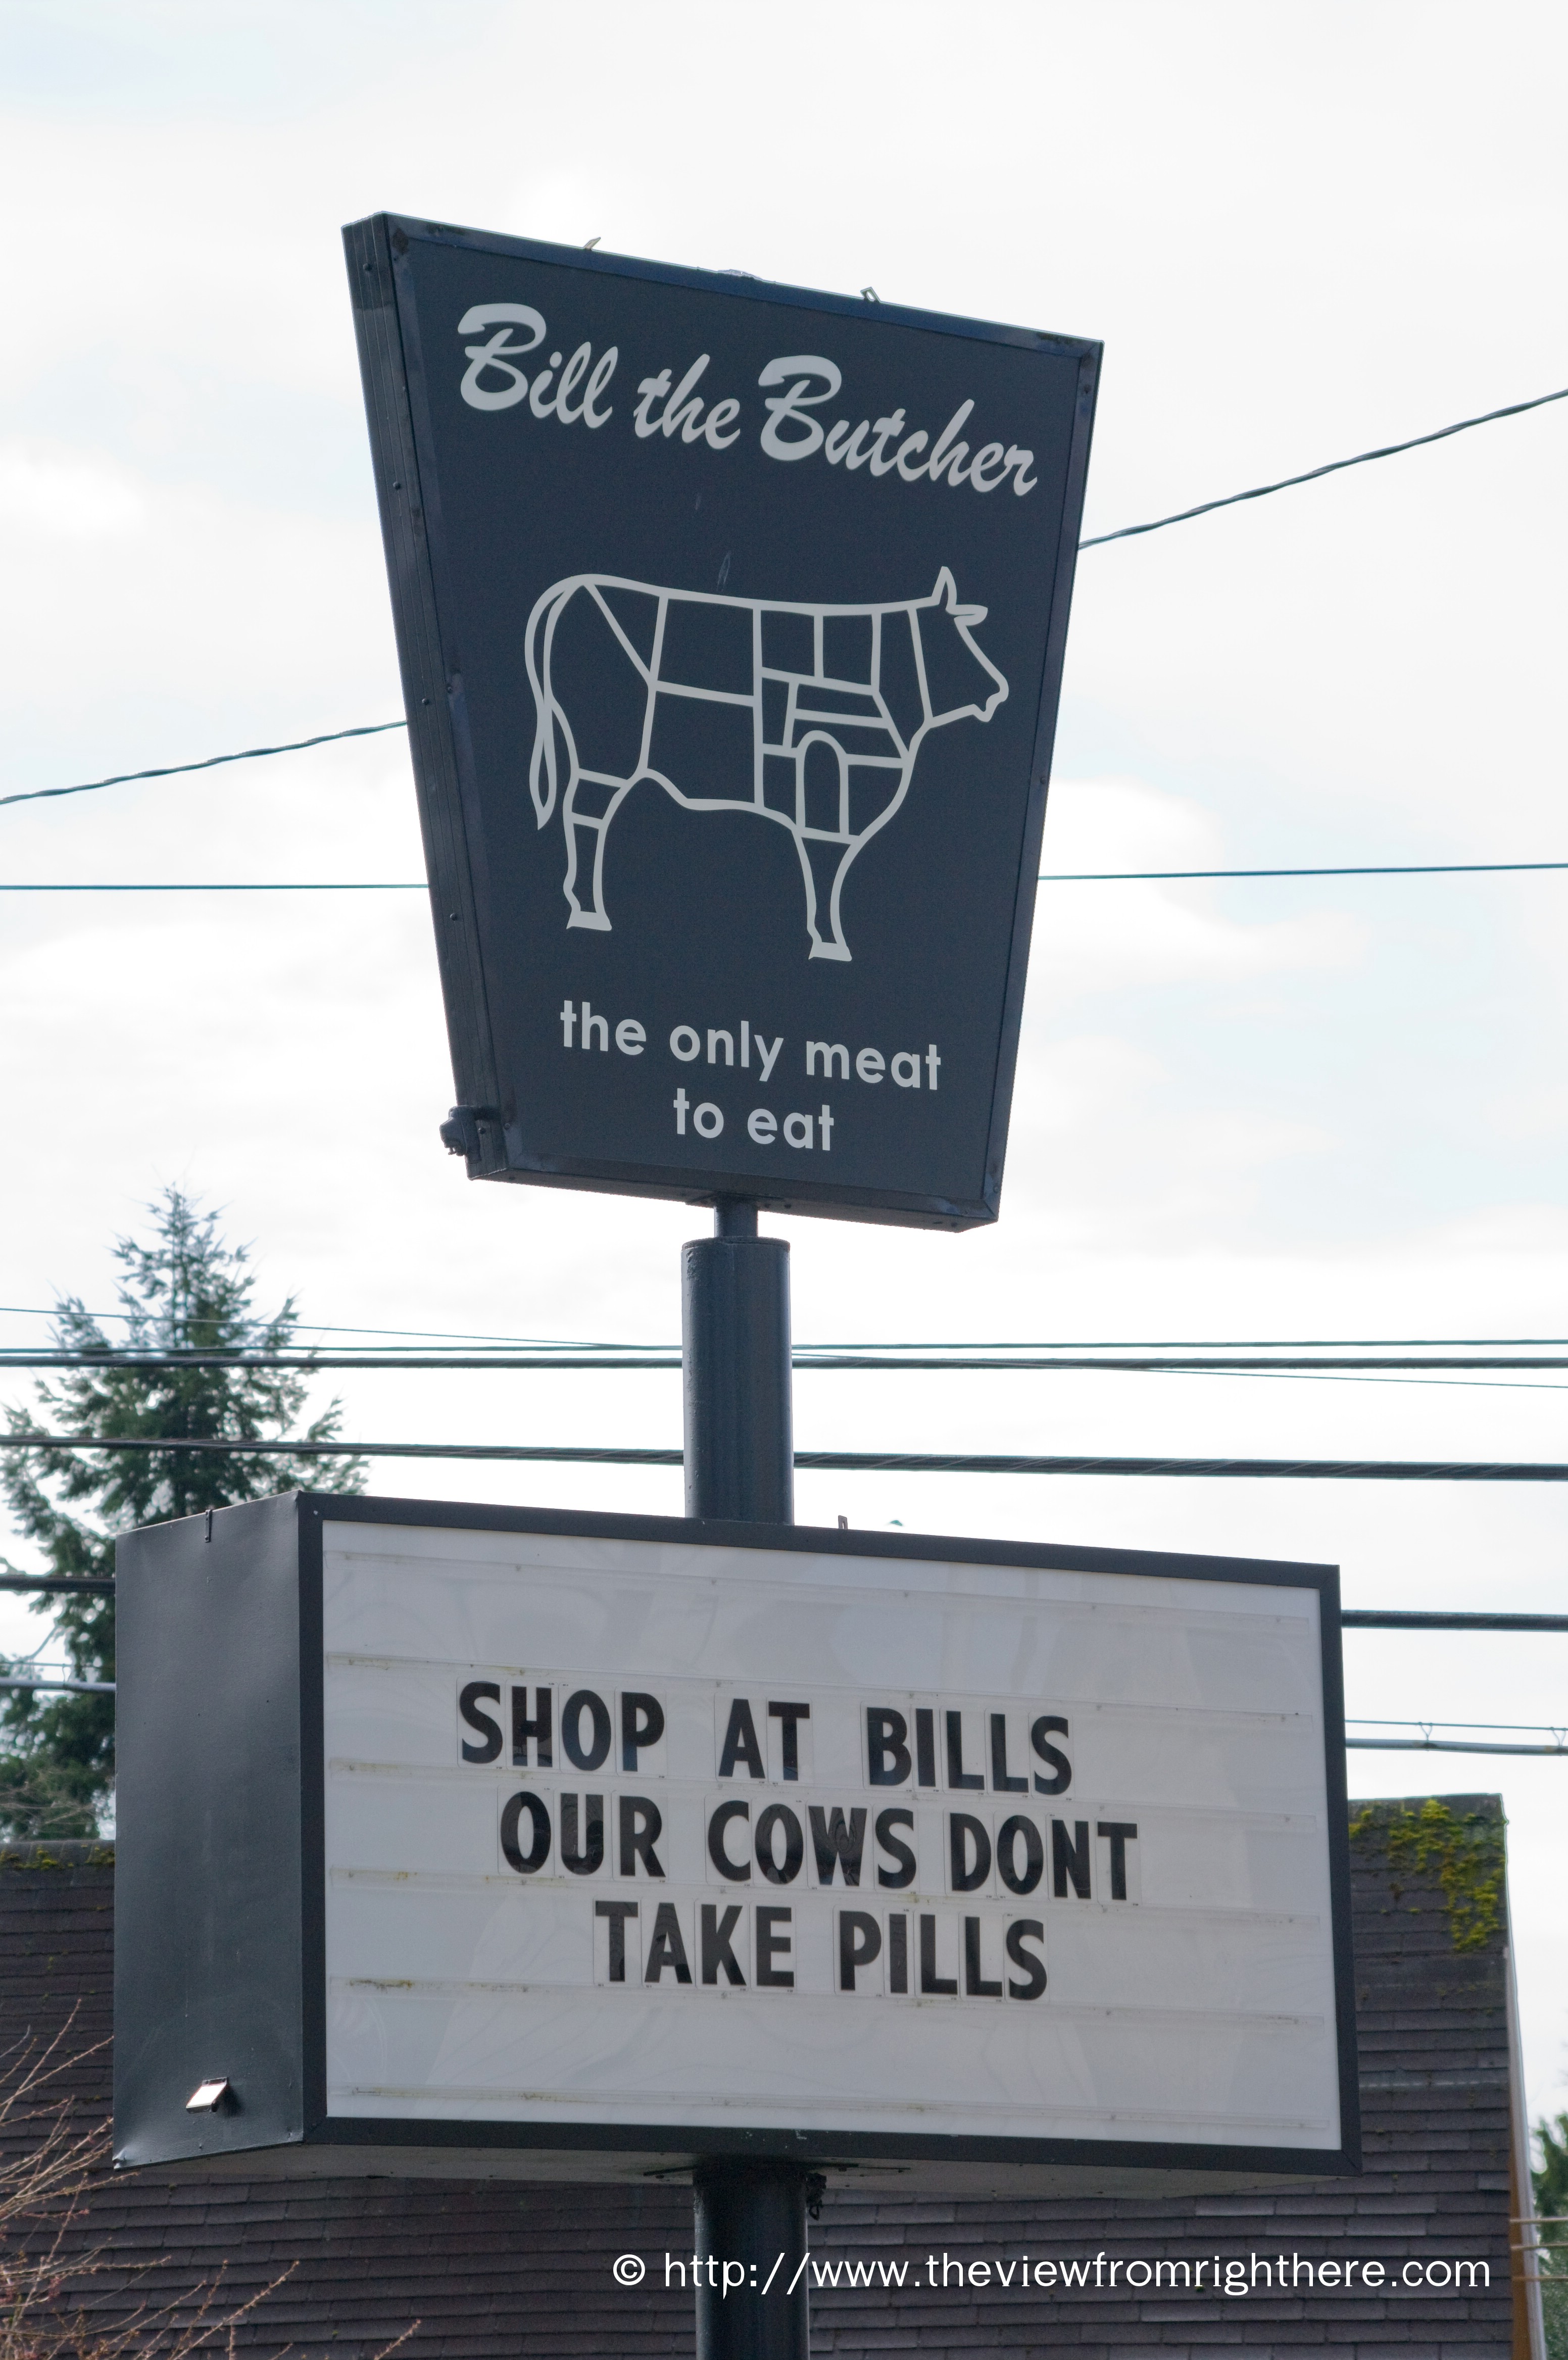 Bill the Butcher – Our Cows Don’t Take Pills